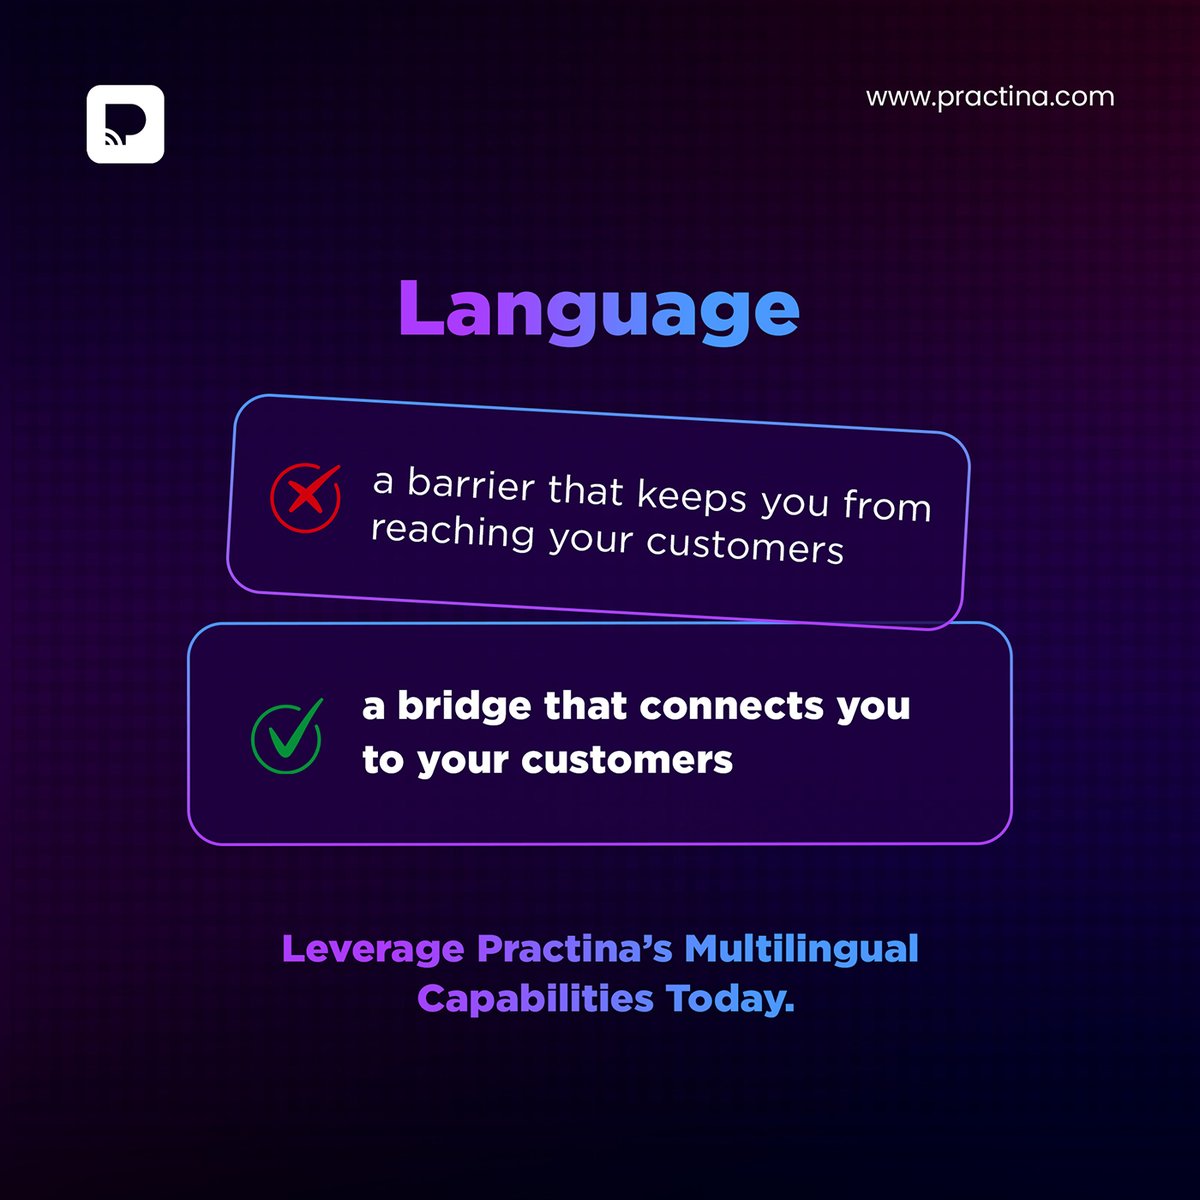 Don't let your marketing message get lost in translation. 
With Practina's multilingual capabilities, turn language differences from barriers into bridges that connect you with potential clients. Communicate with your audience impactfully, and globally with Practina.